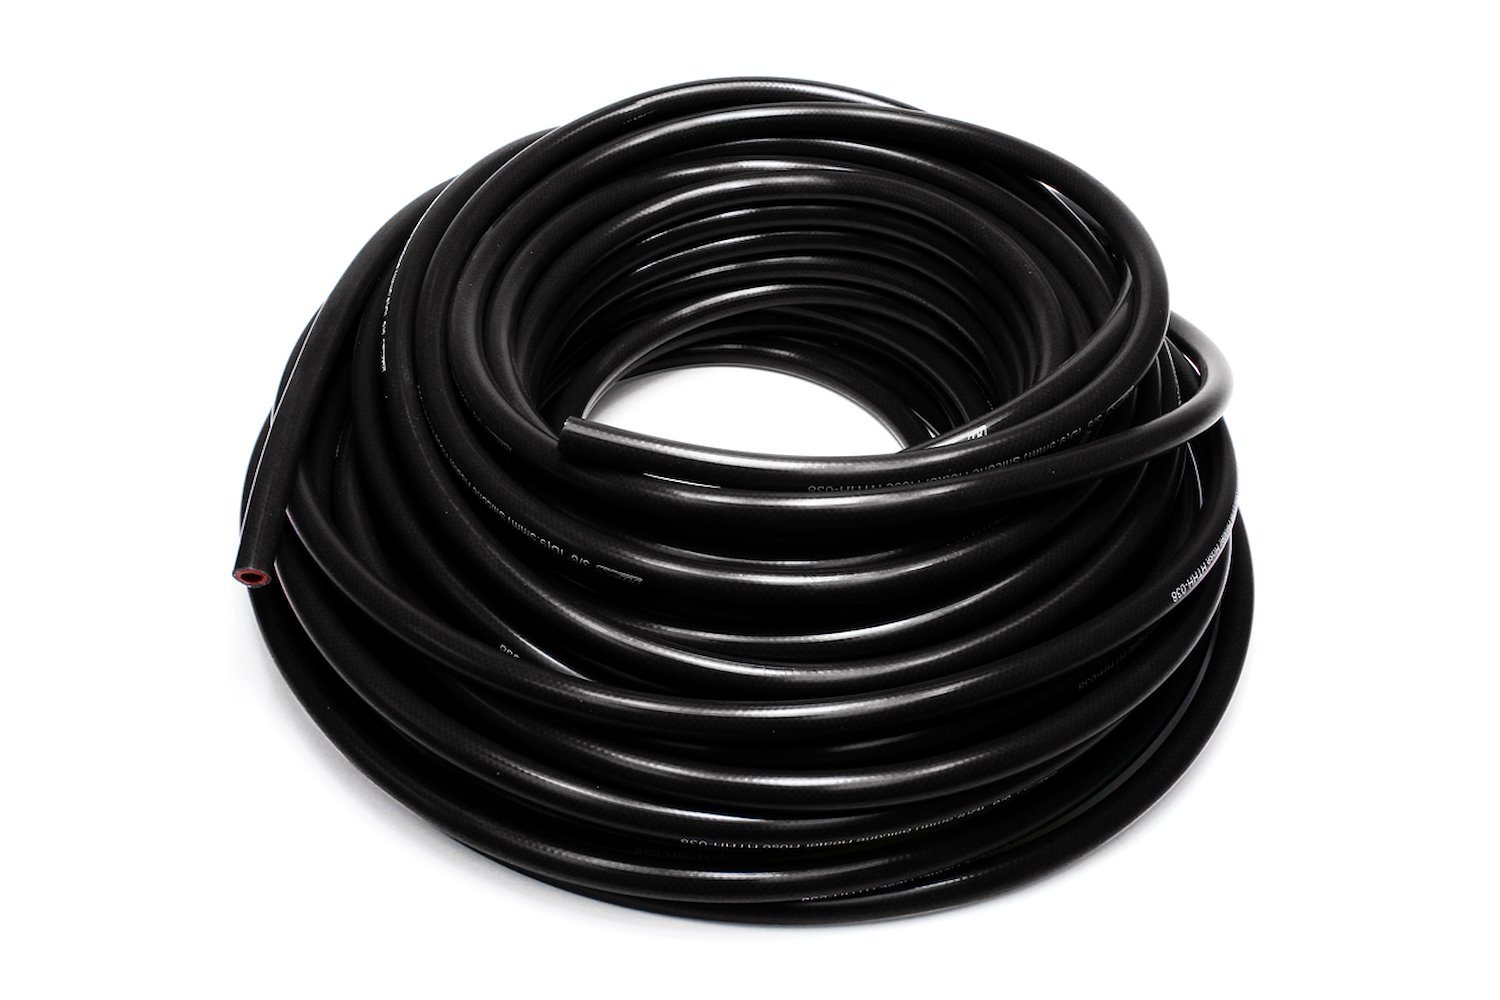 HTHH-013-BLKx250 Silicone Heater Hose Tubing, High-Temp Reinforced, 1/8 in. ID, 250 ft. Roll, Black